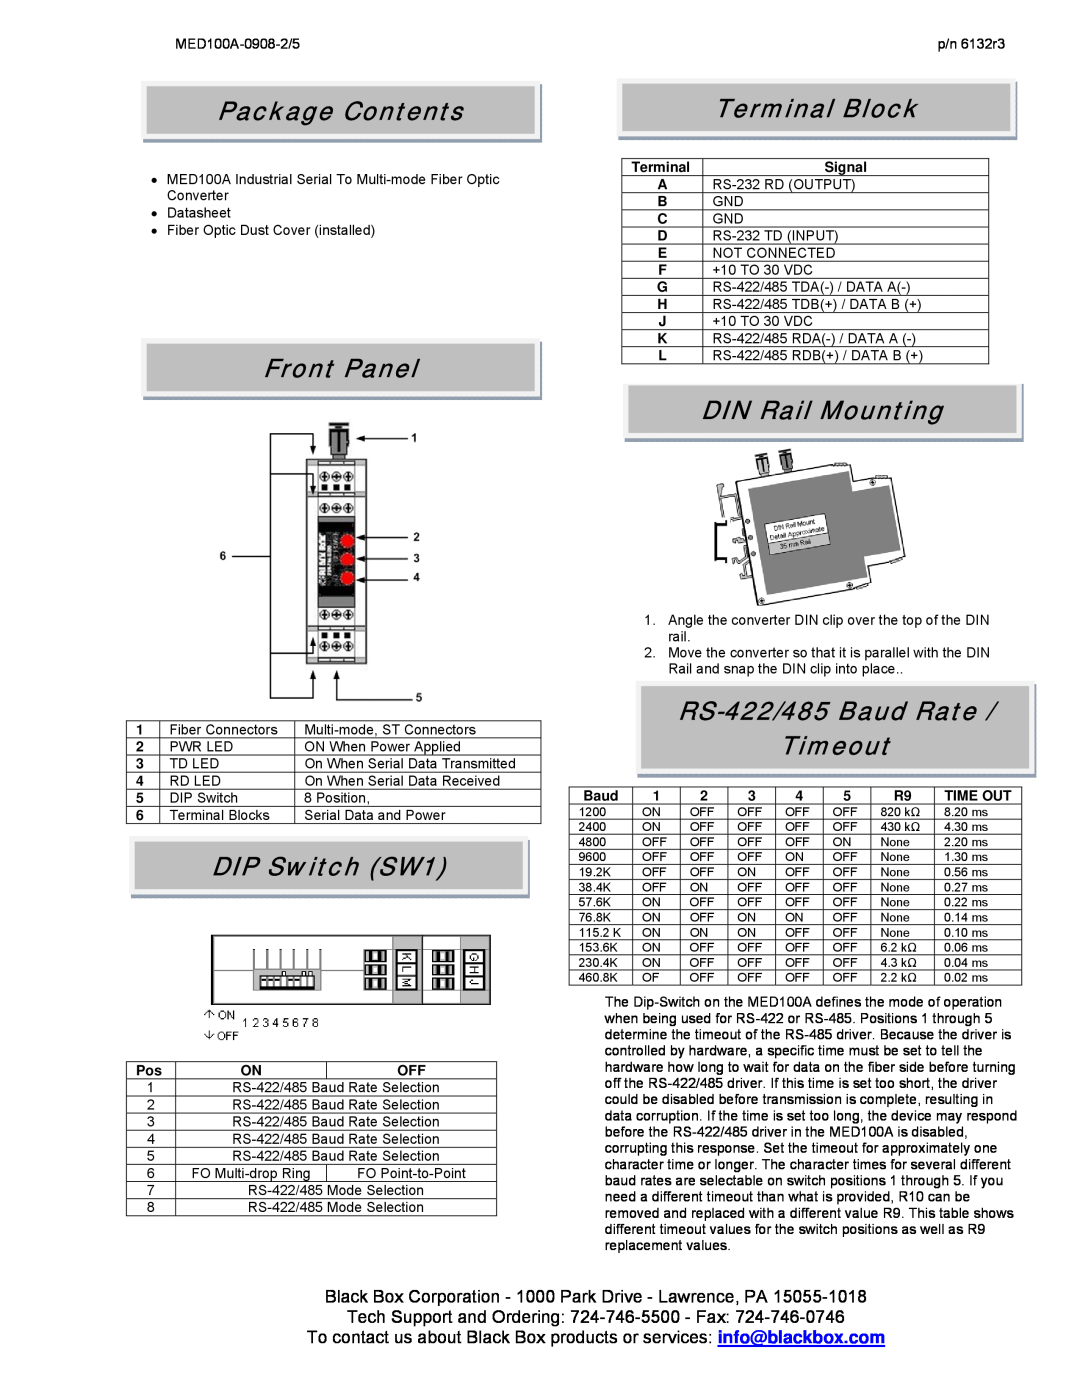 Black Box MED100A specifications Package Contents, Terminal Block, Front Panel, DIP Switch SW1, DIN Rail Mounting 